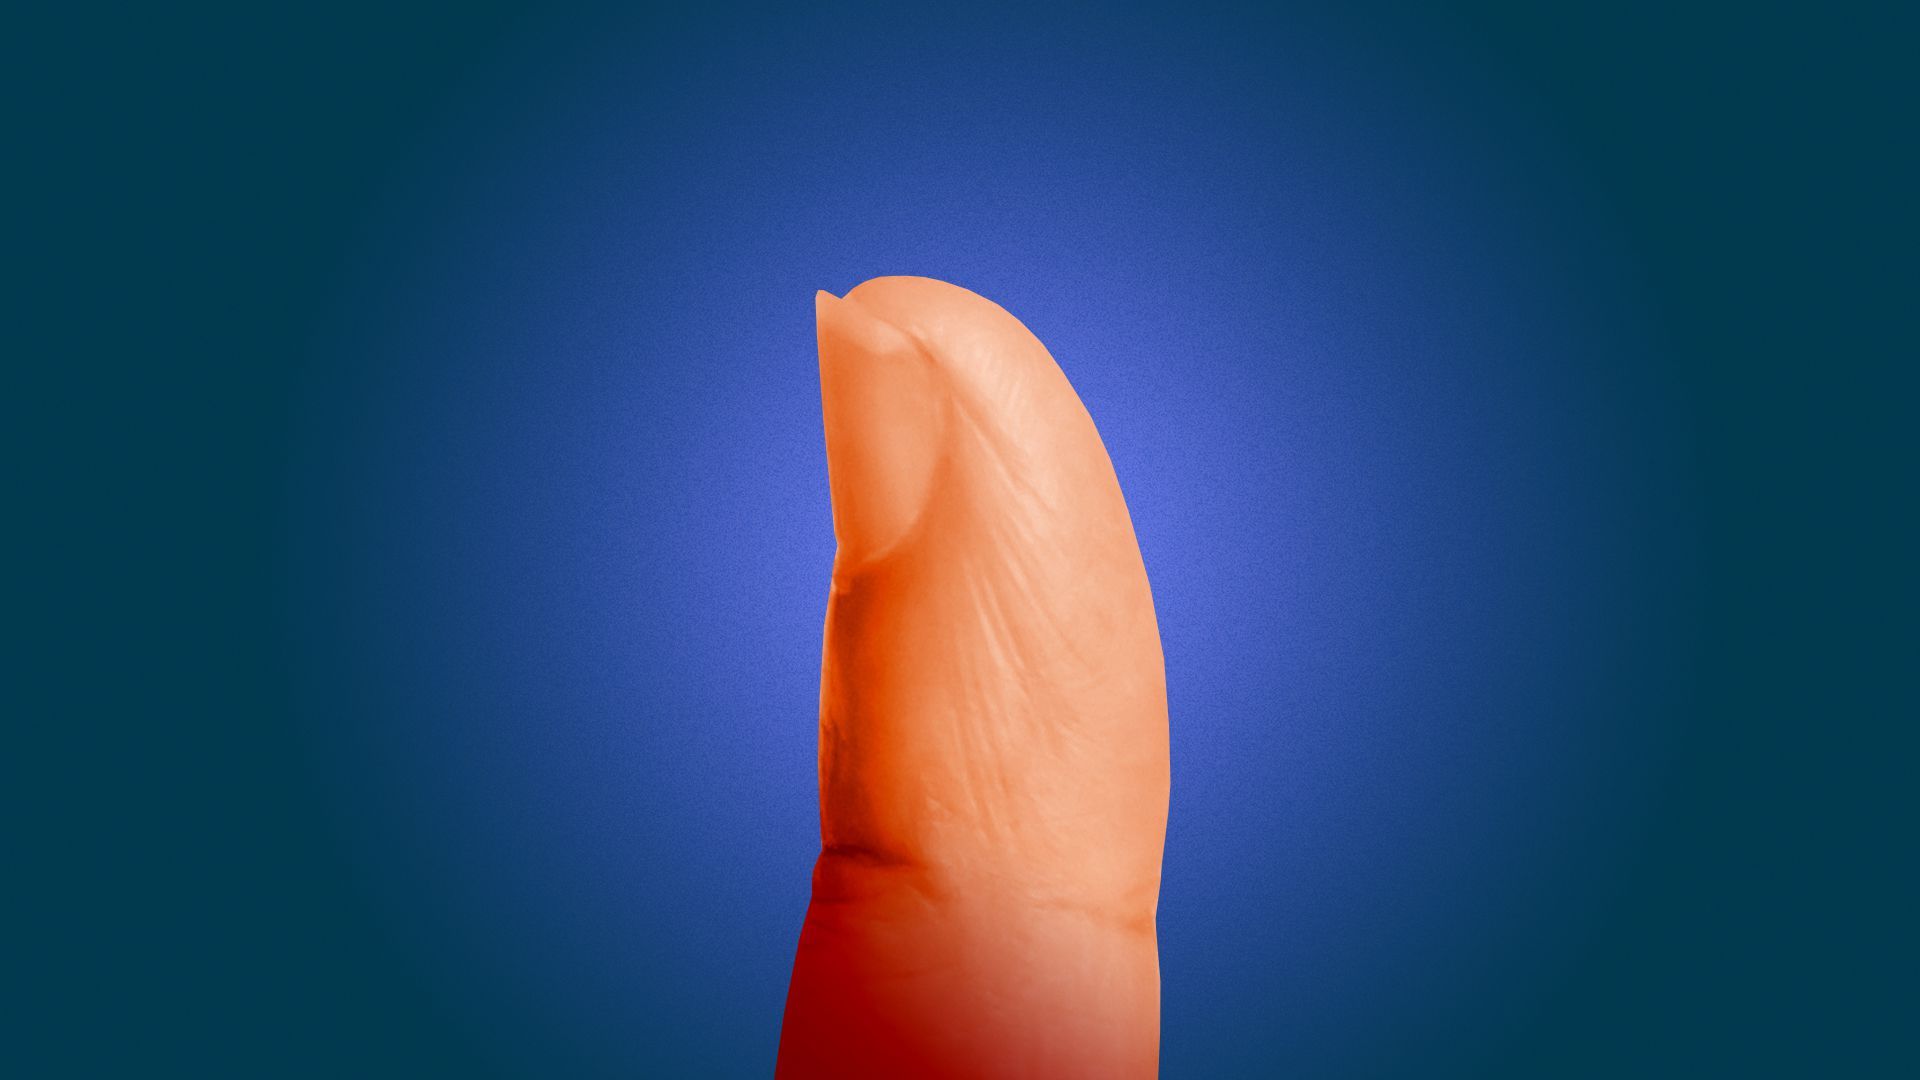 Illustration of a glowing finger